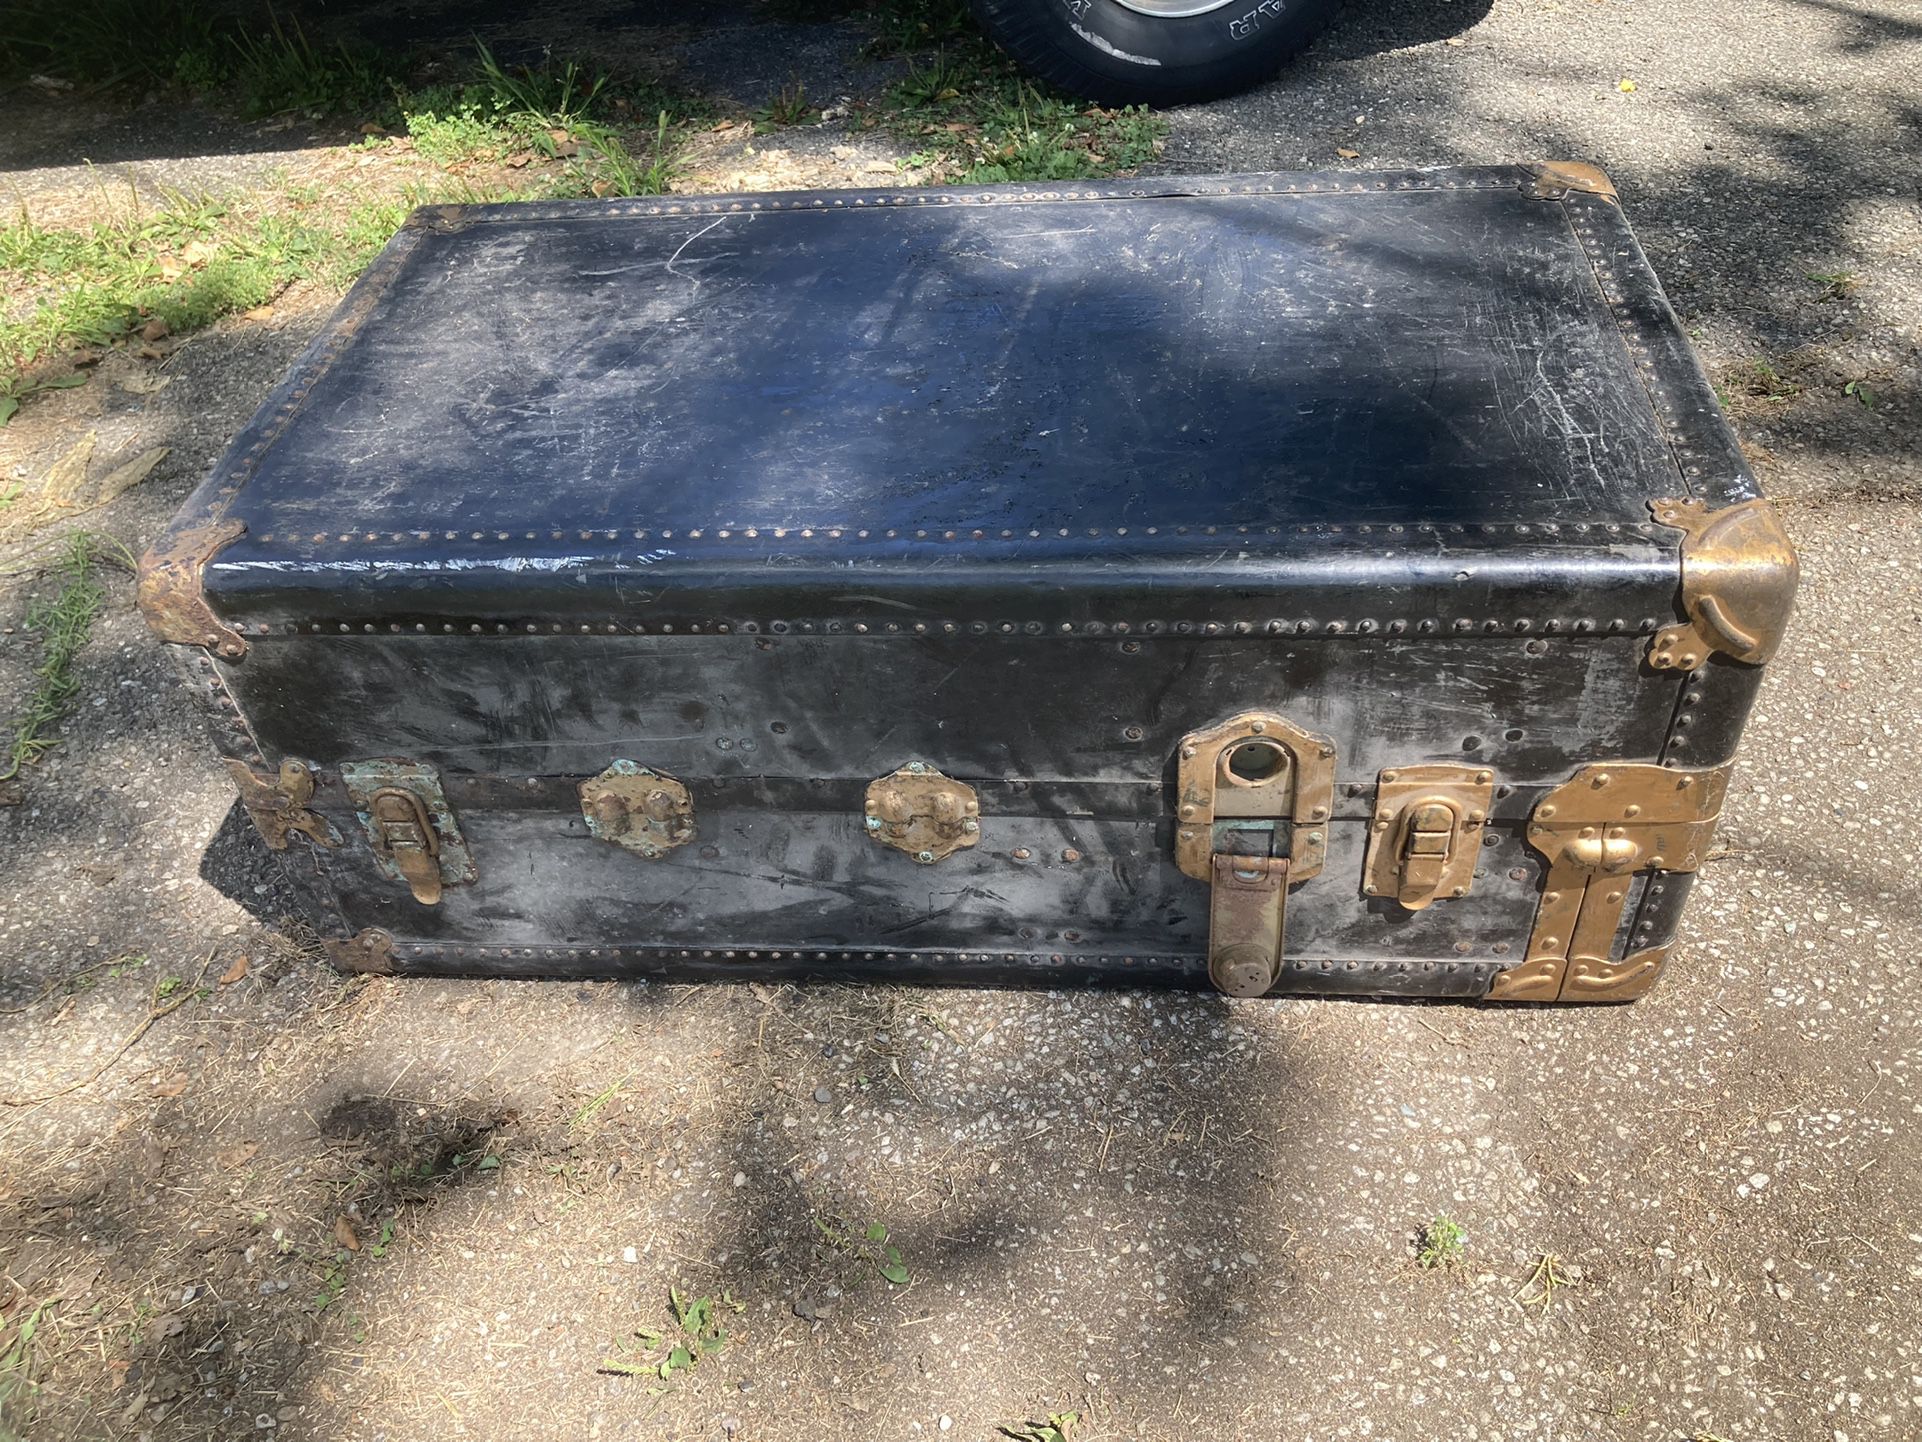 Antique 1920 Mendel Trunx Steamer Trunk with Leather and Brass and